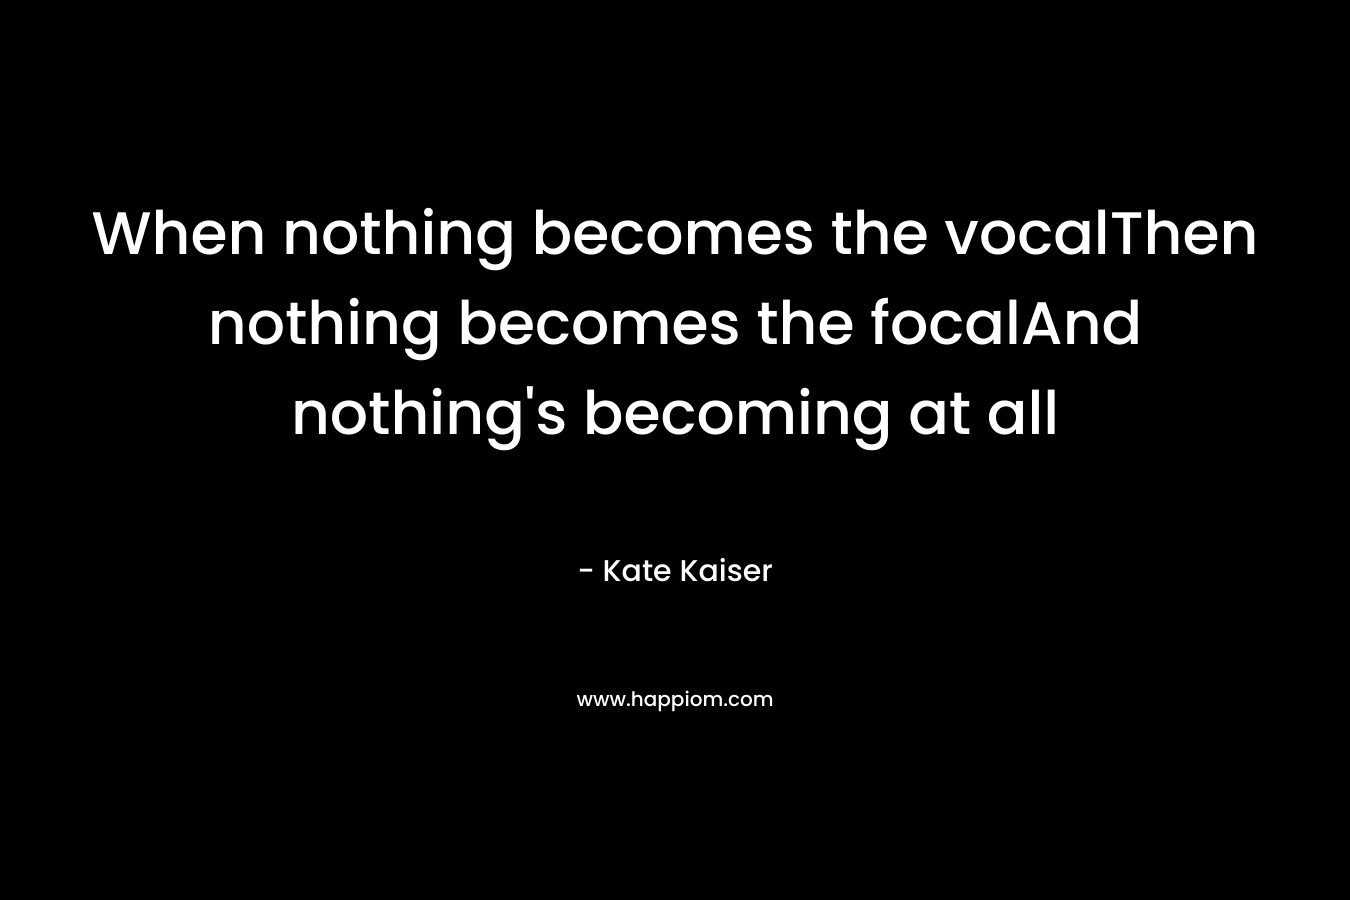 When nothing becomes the vocalThen nothing becomes the focalAnd nothing's becoming at all